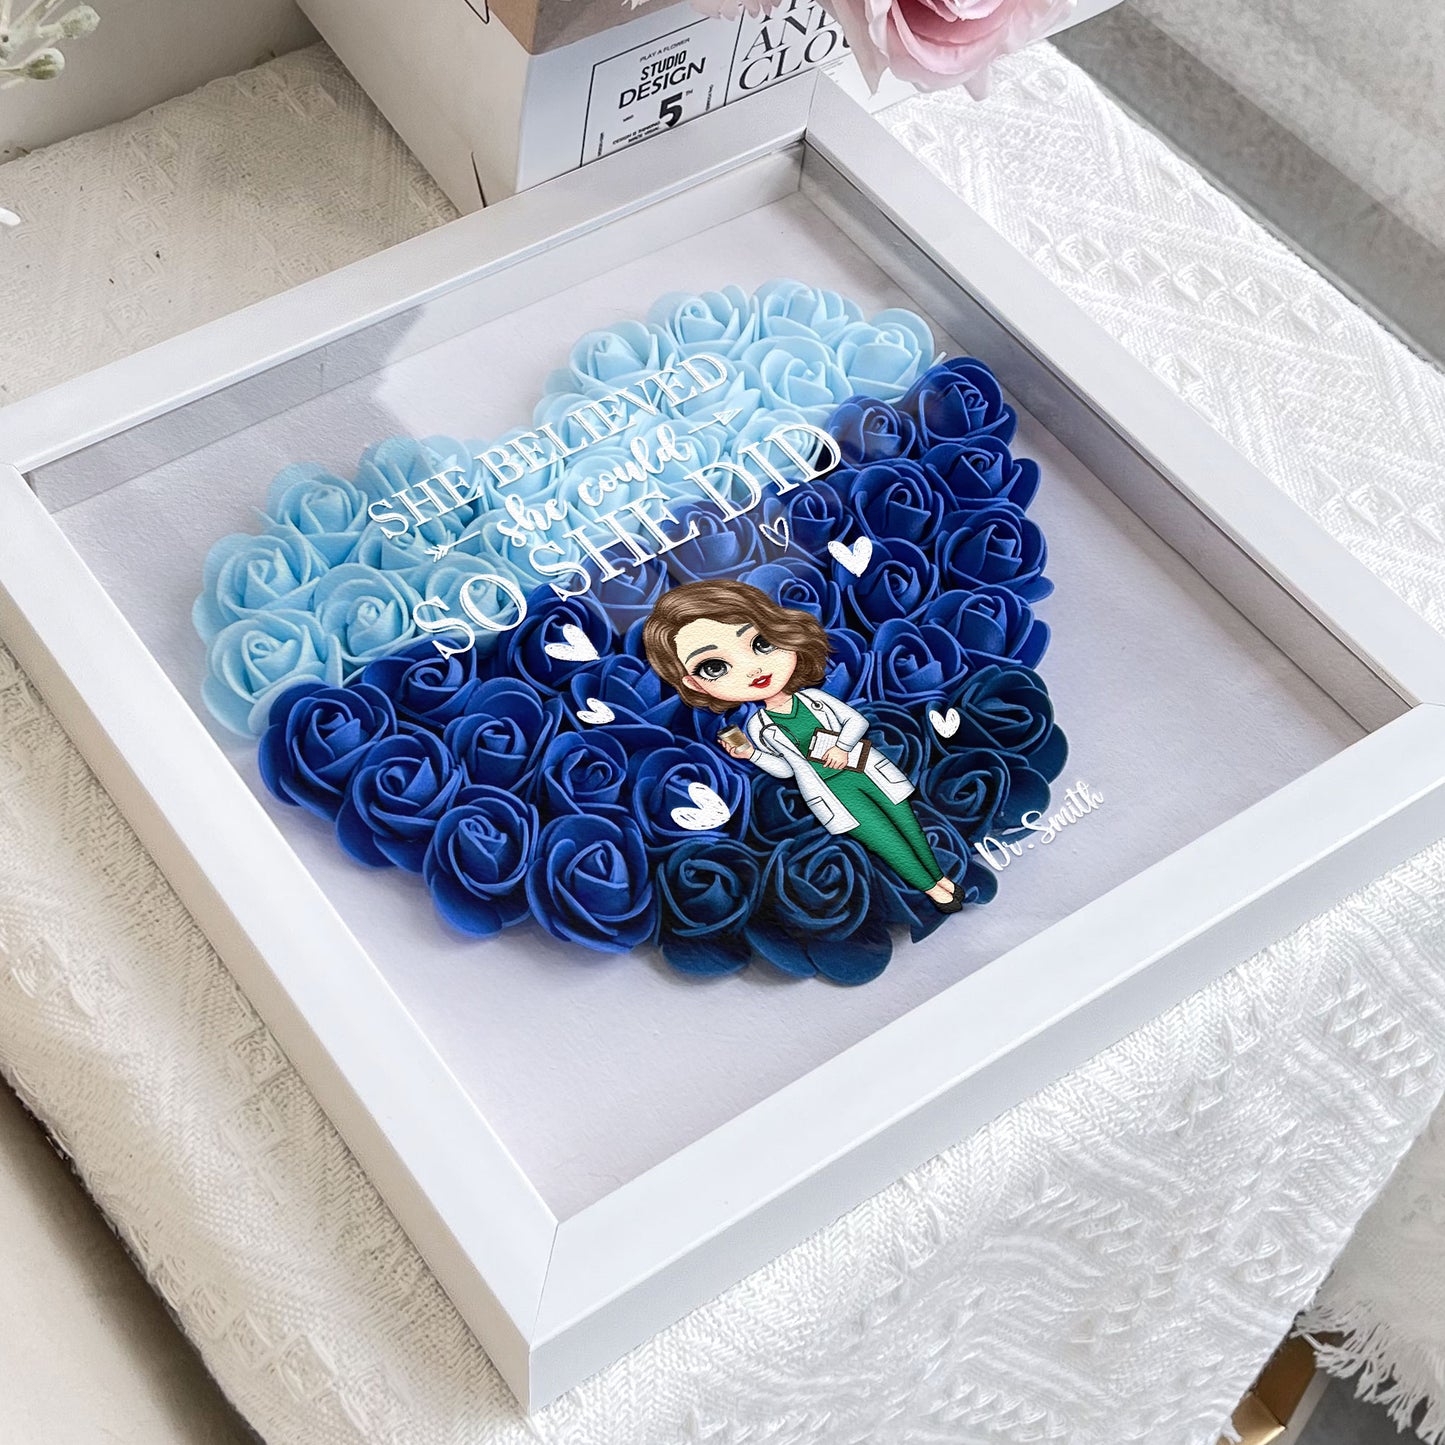 She Believed She Could - Personalized Flower Shadow Box